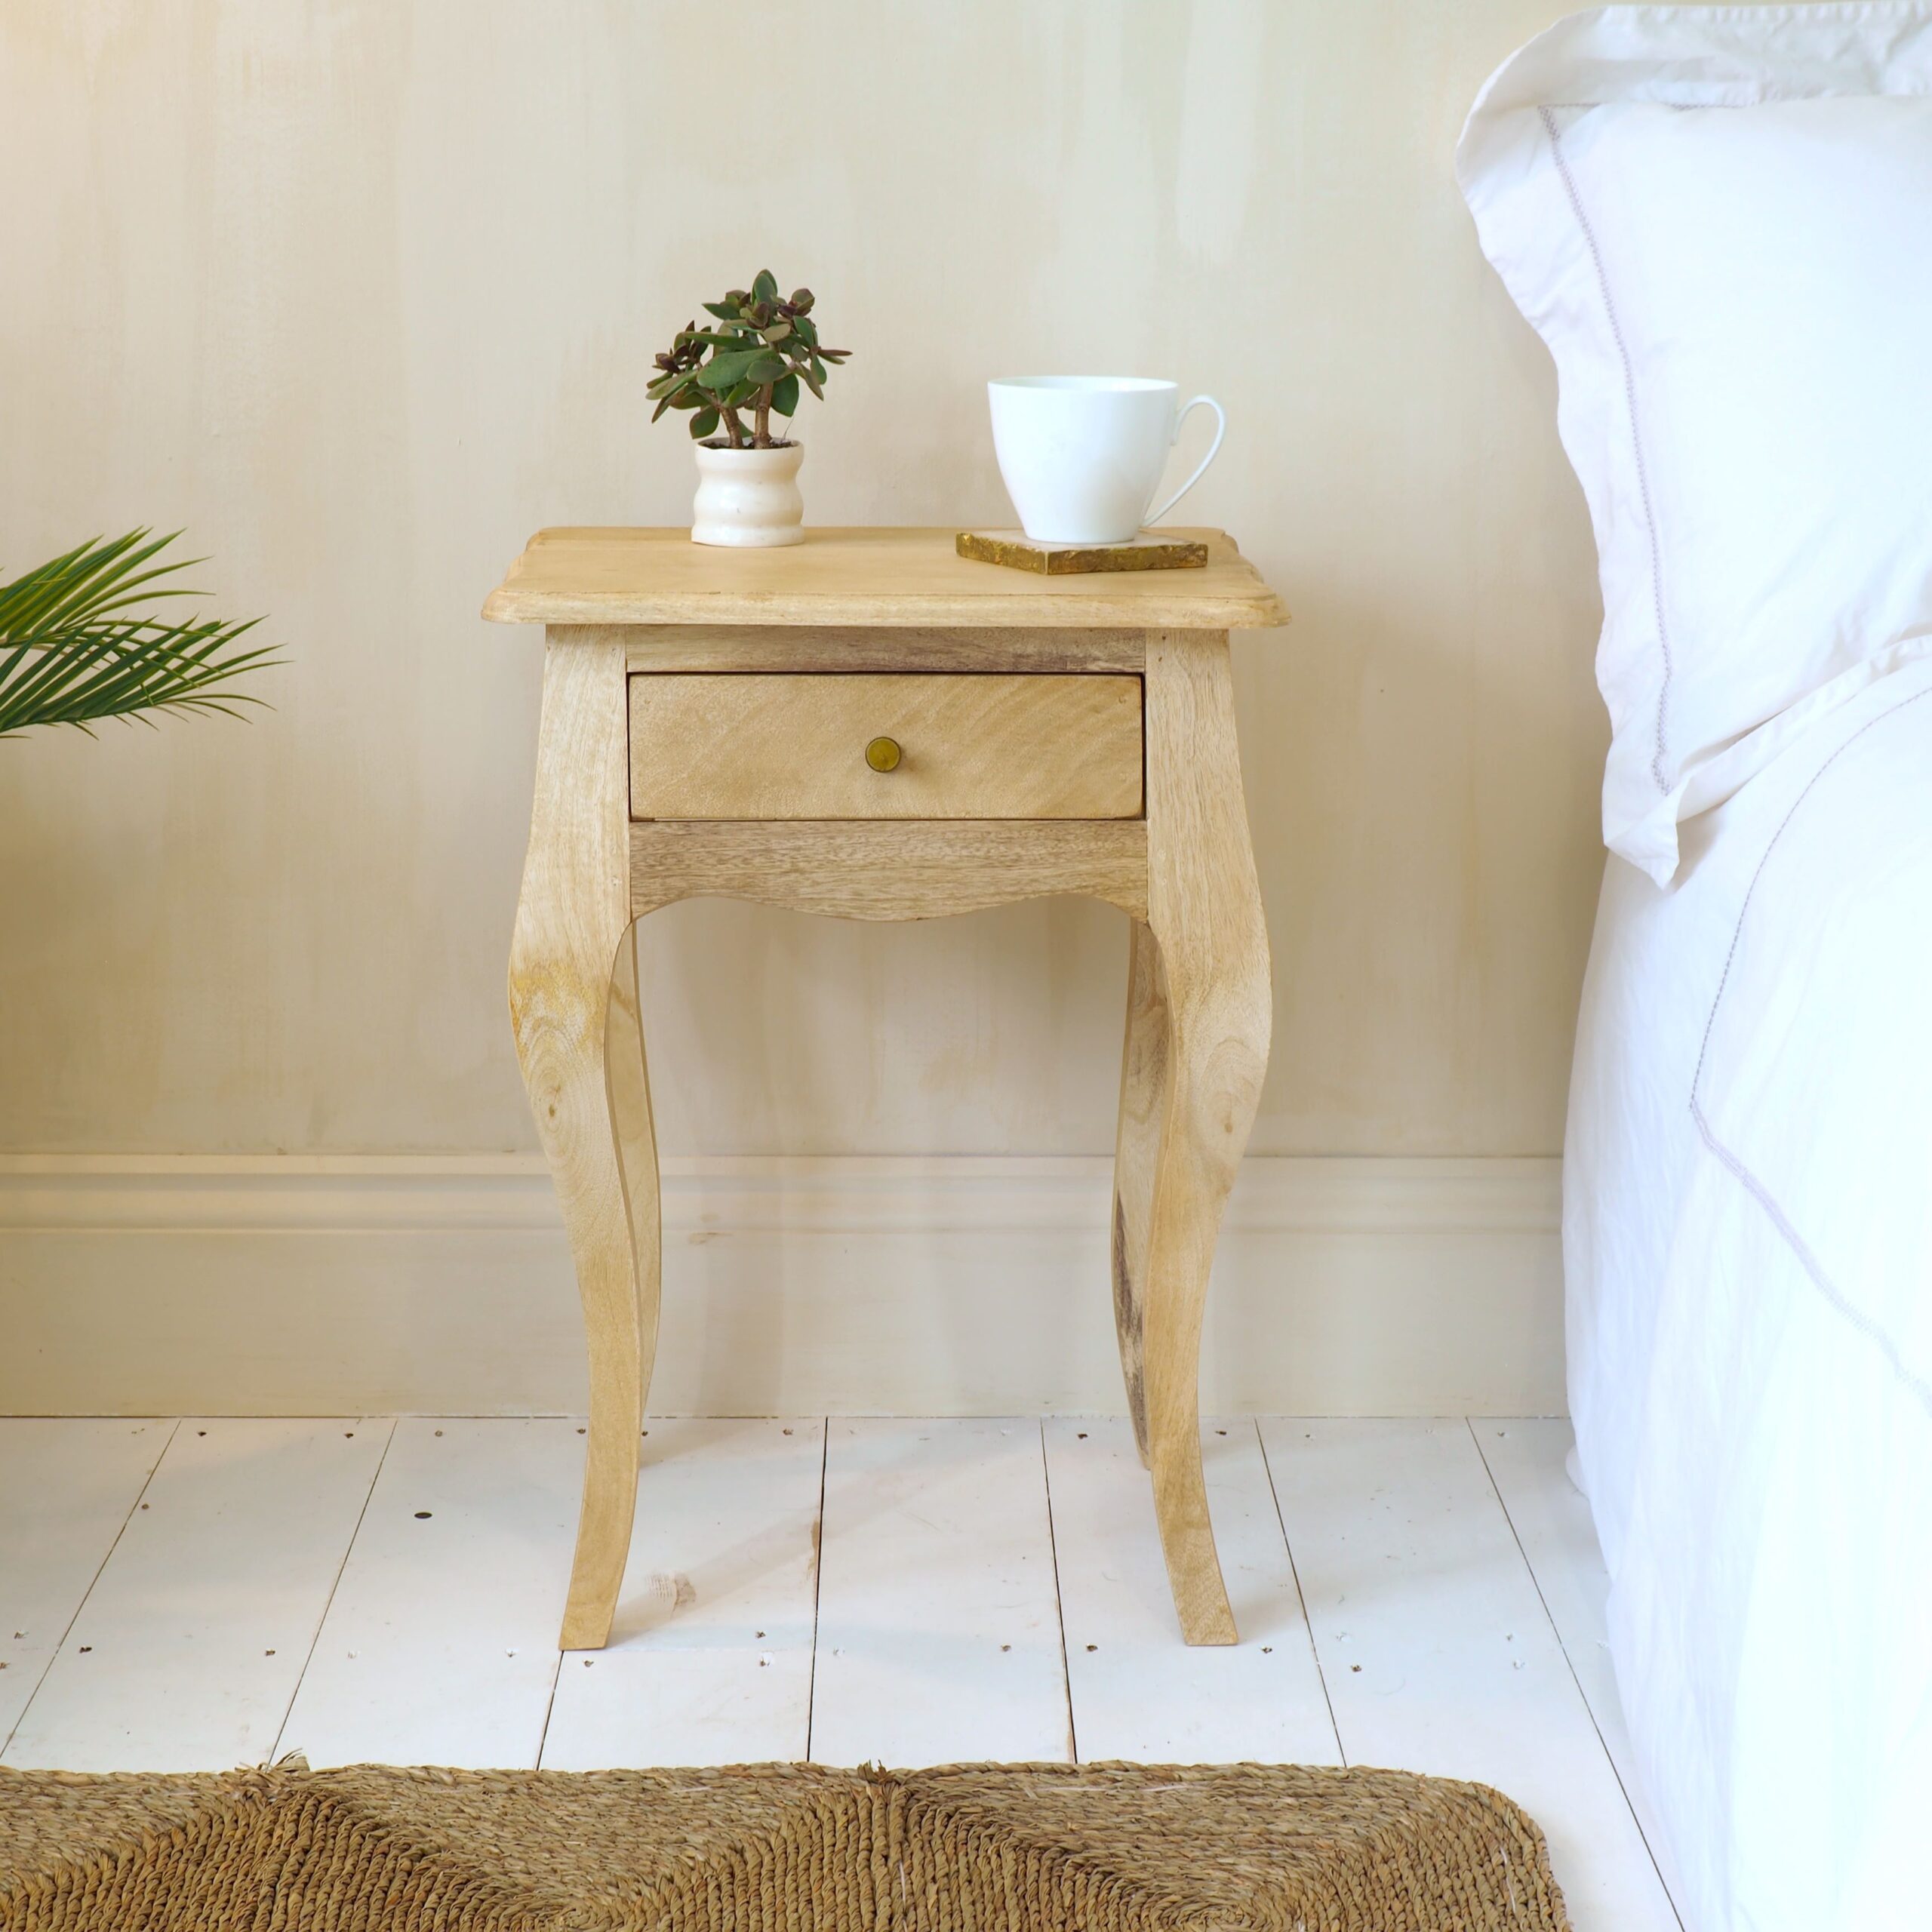 Natural Bedside Table face on, on white wooden floor in bedroom setting